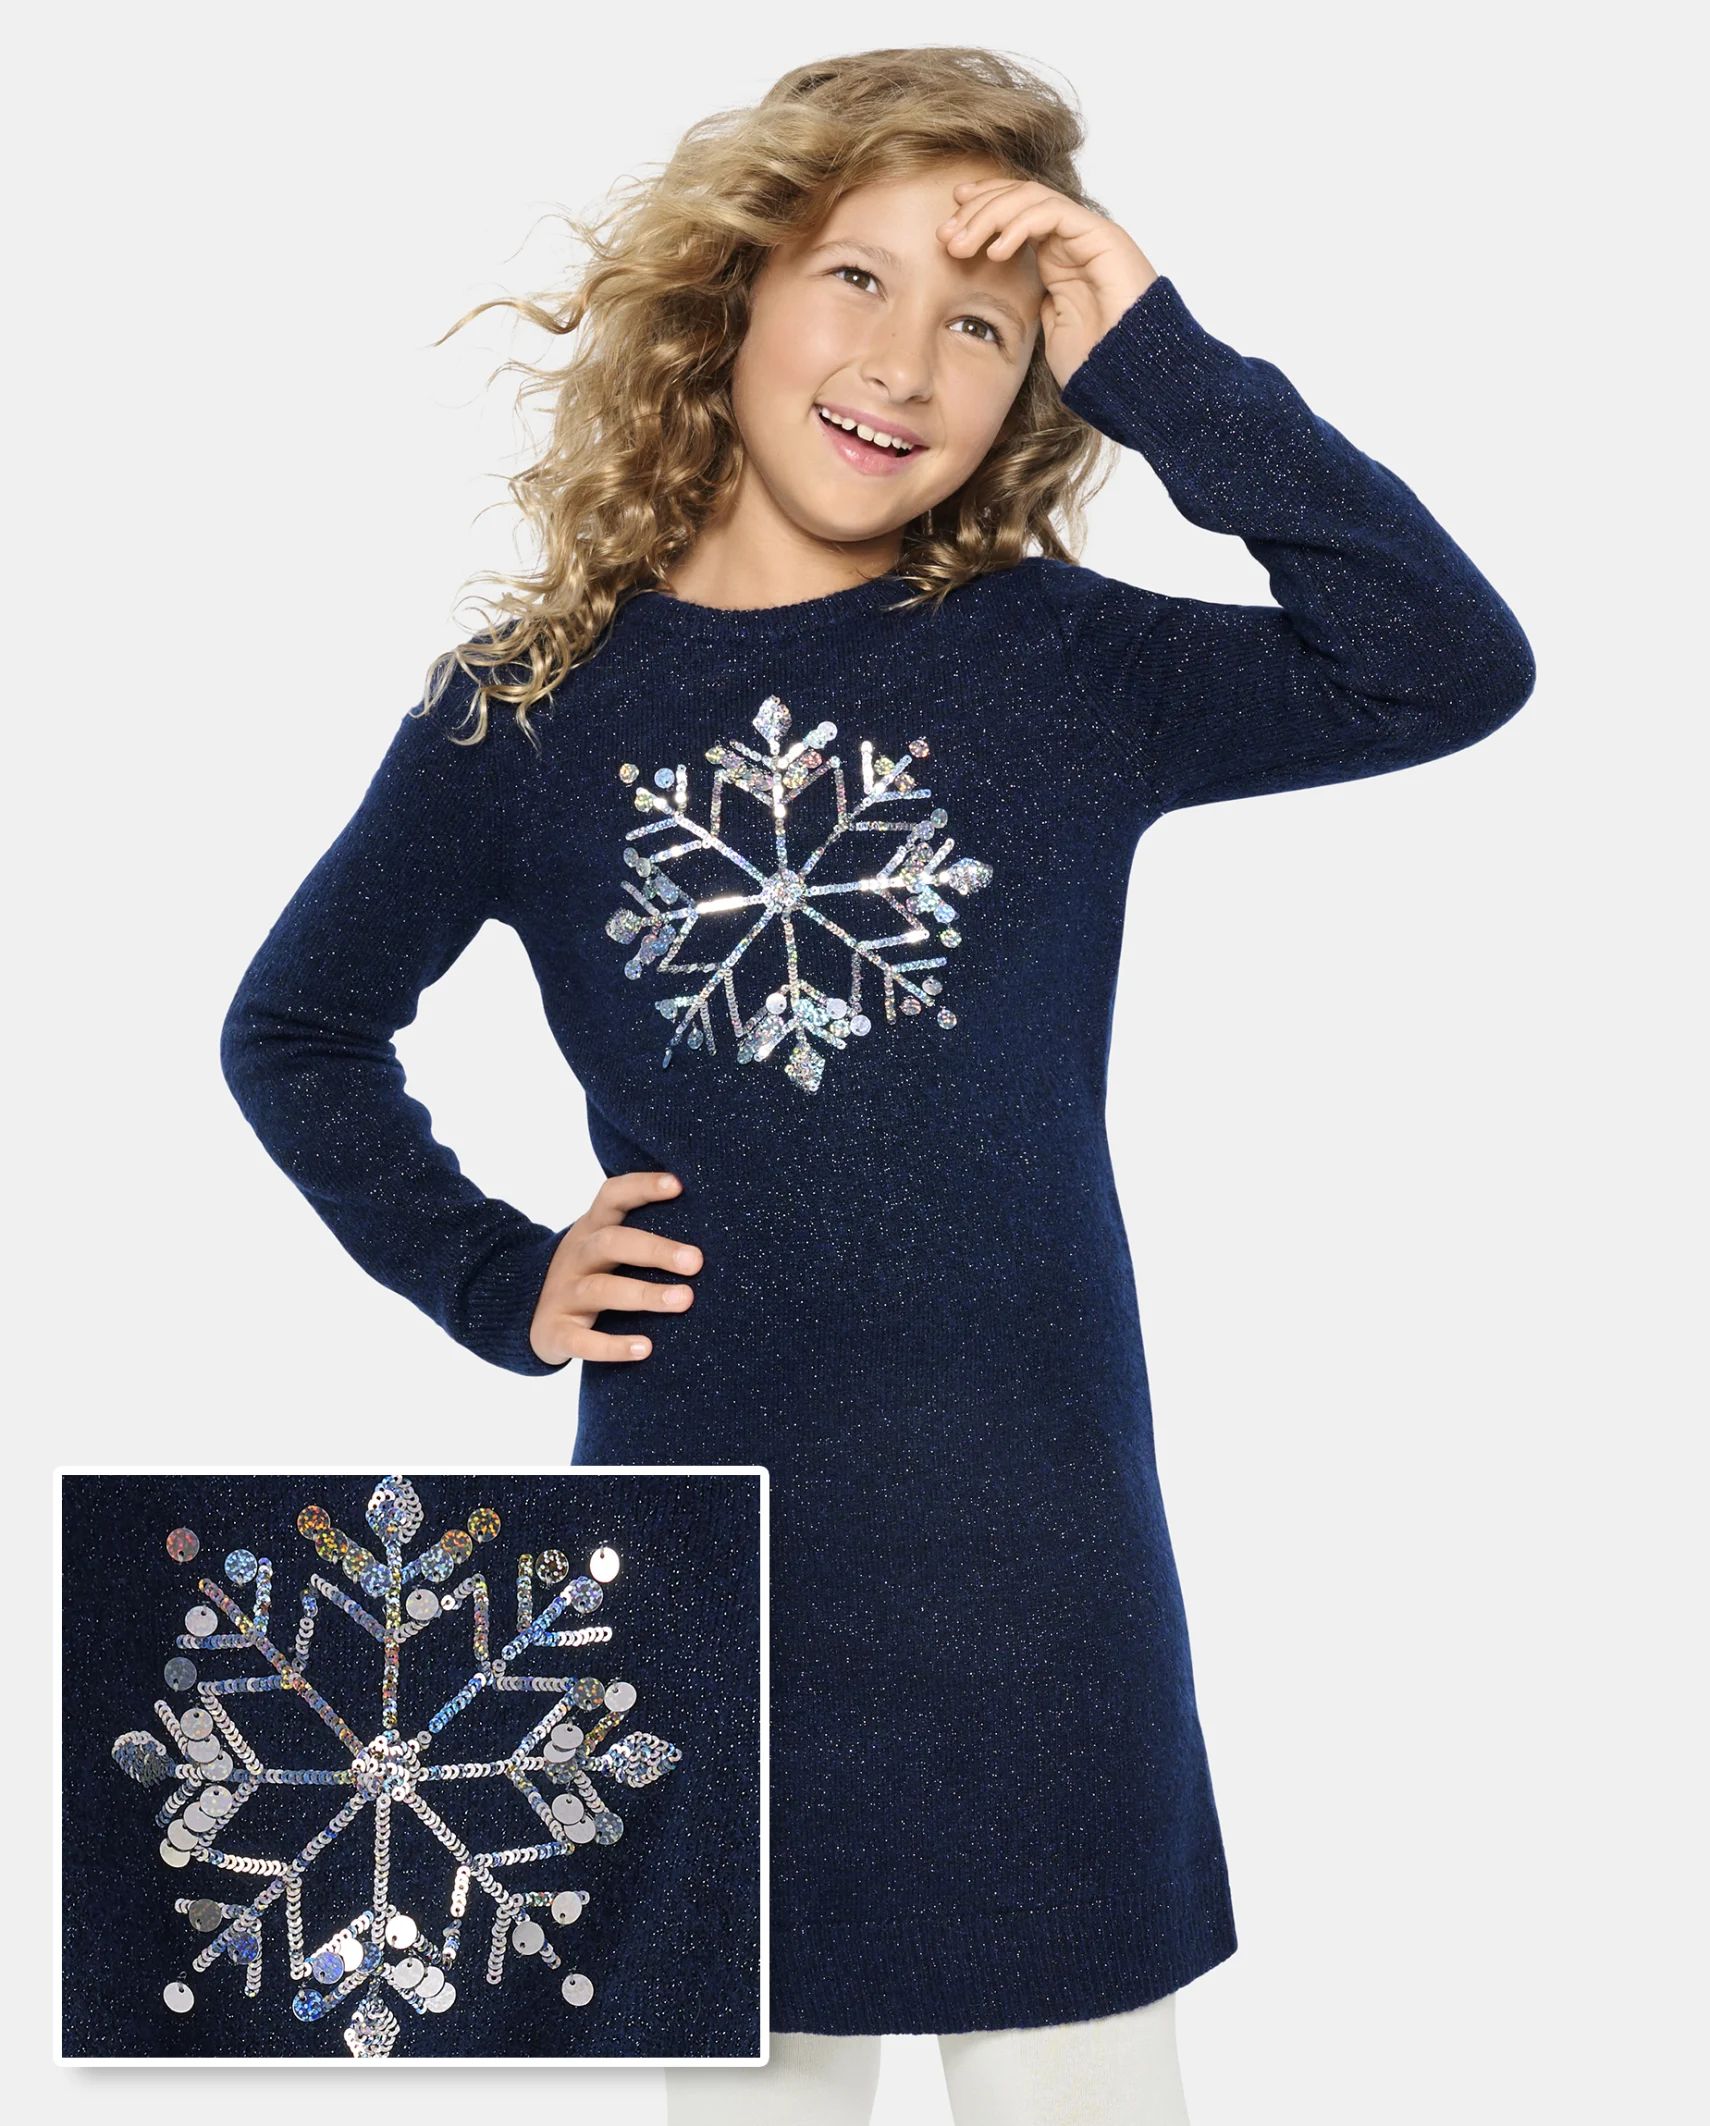 Girls Sequin Snowflake Sweater Dress - tidal | The Children's Place